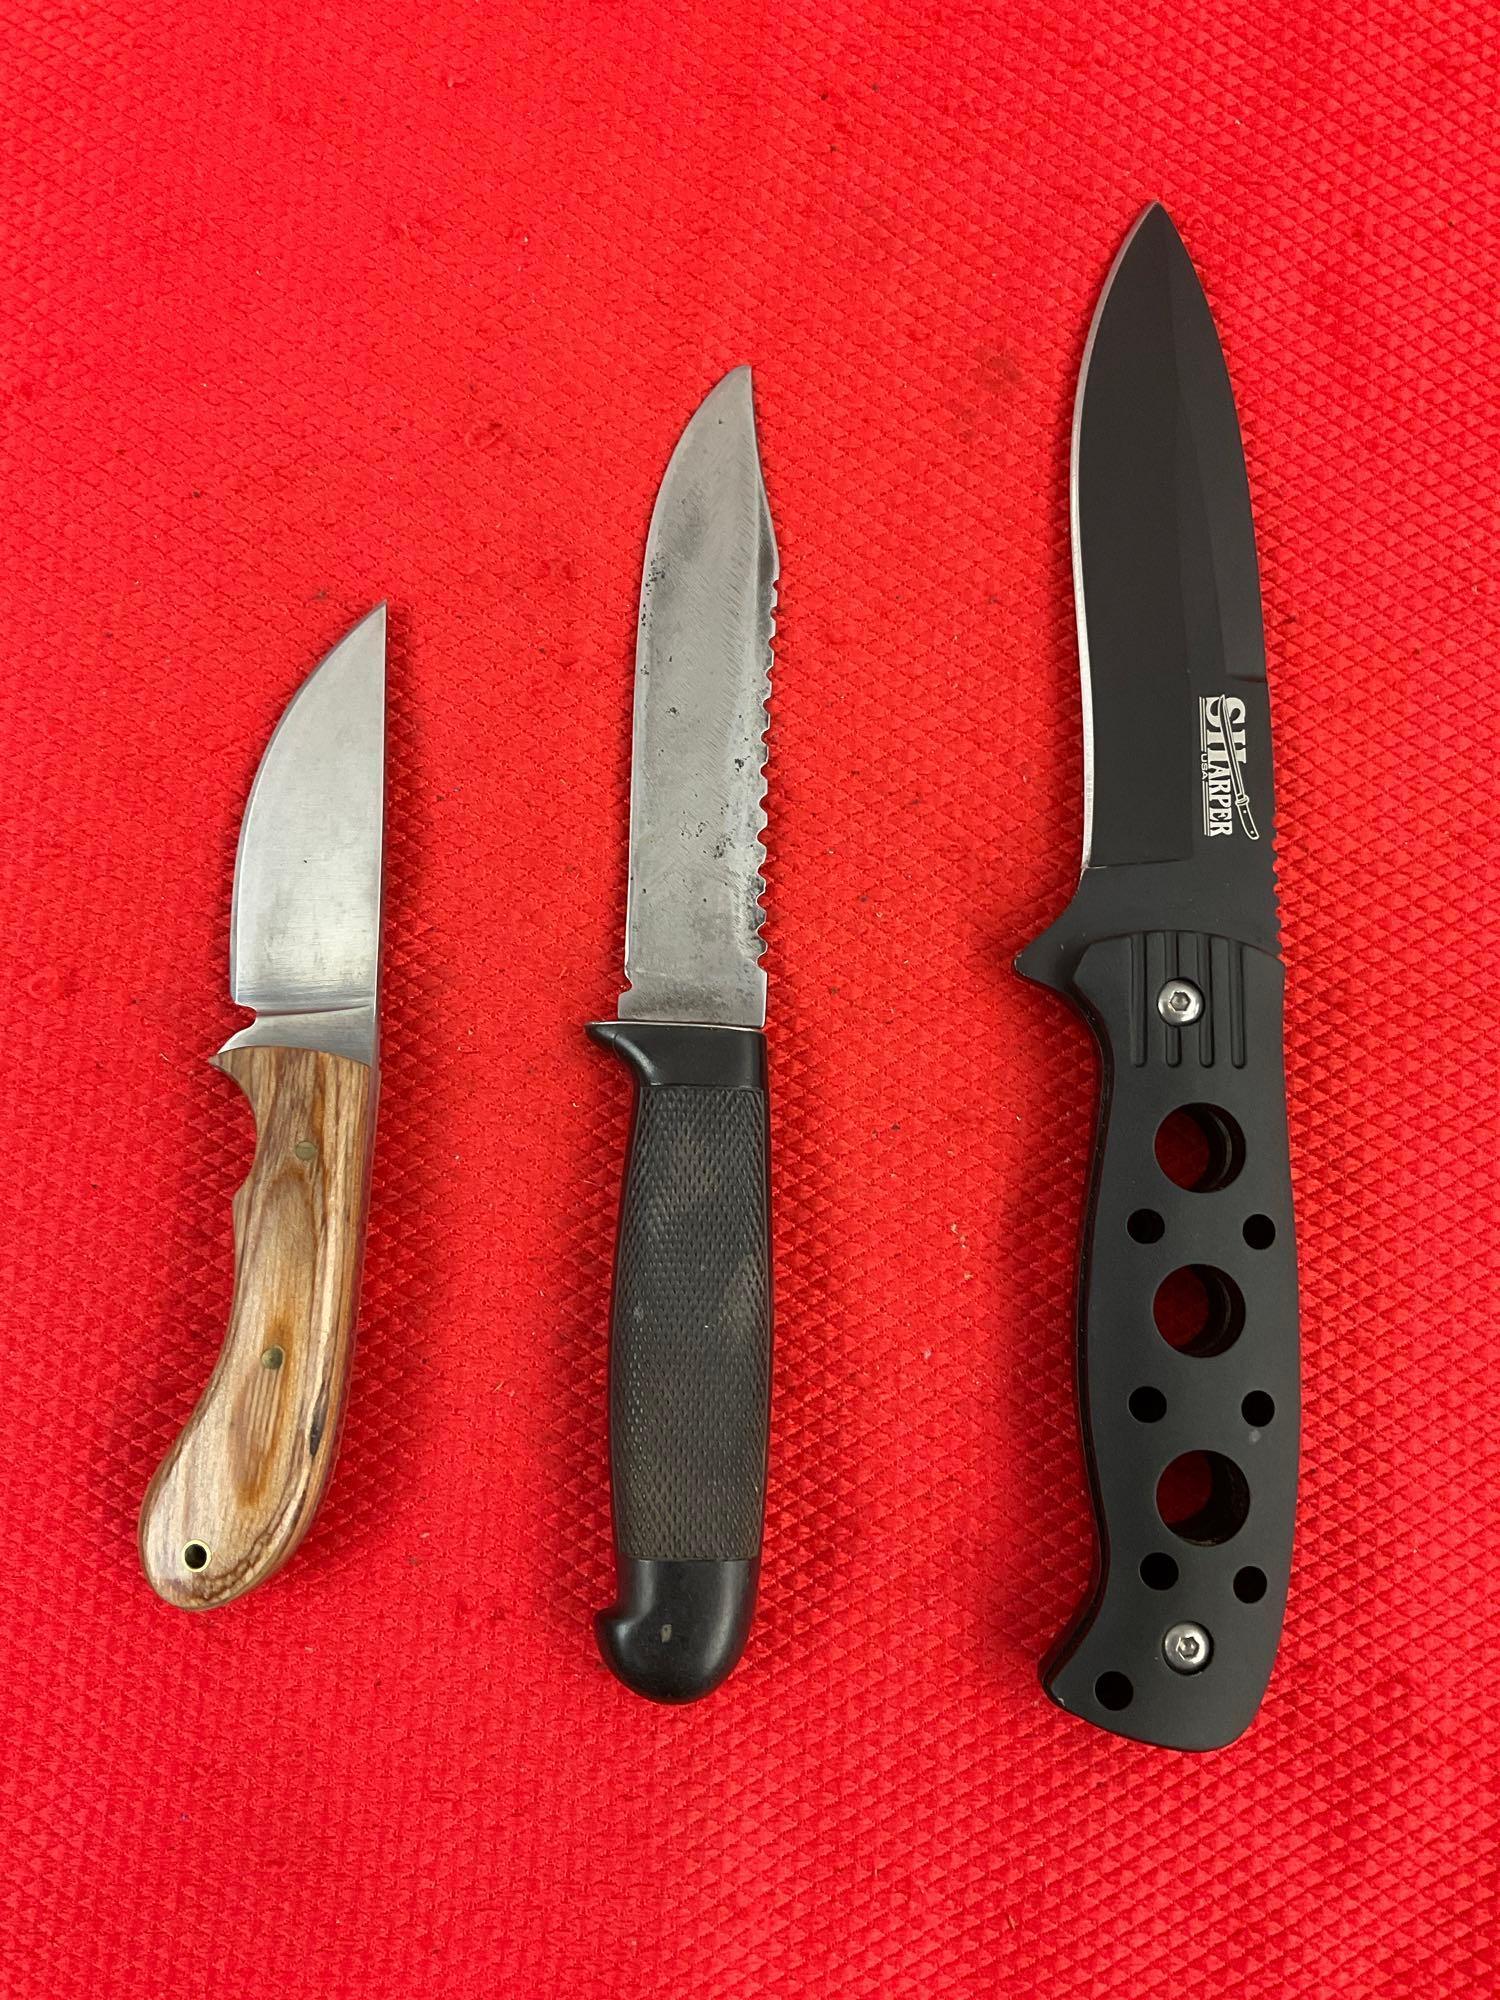 3 pcs Steel Fixed Blade Hunting Knives w/ Sheathes. 1x Sharper USA, 2x Unmarked. See pics.